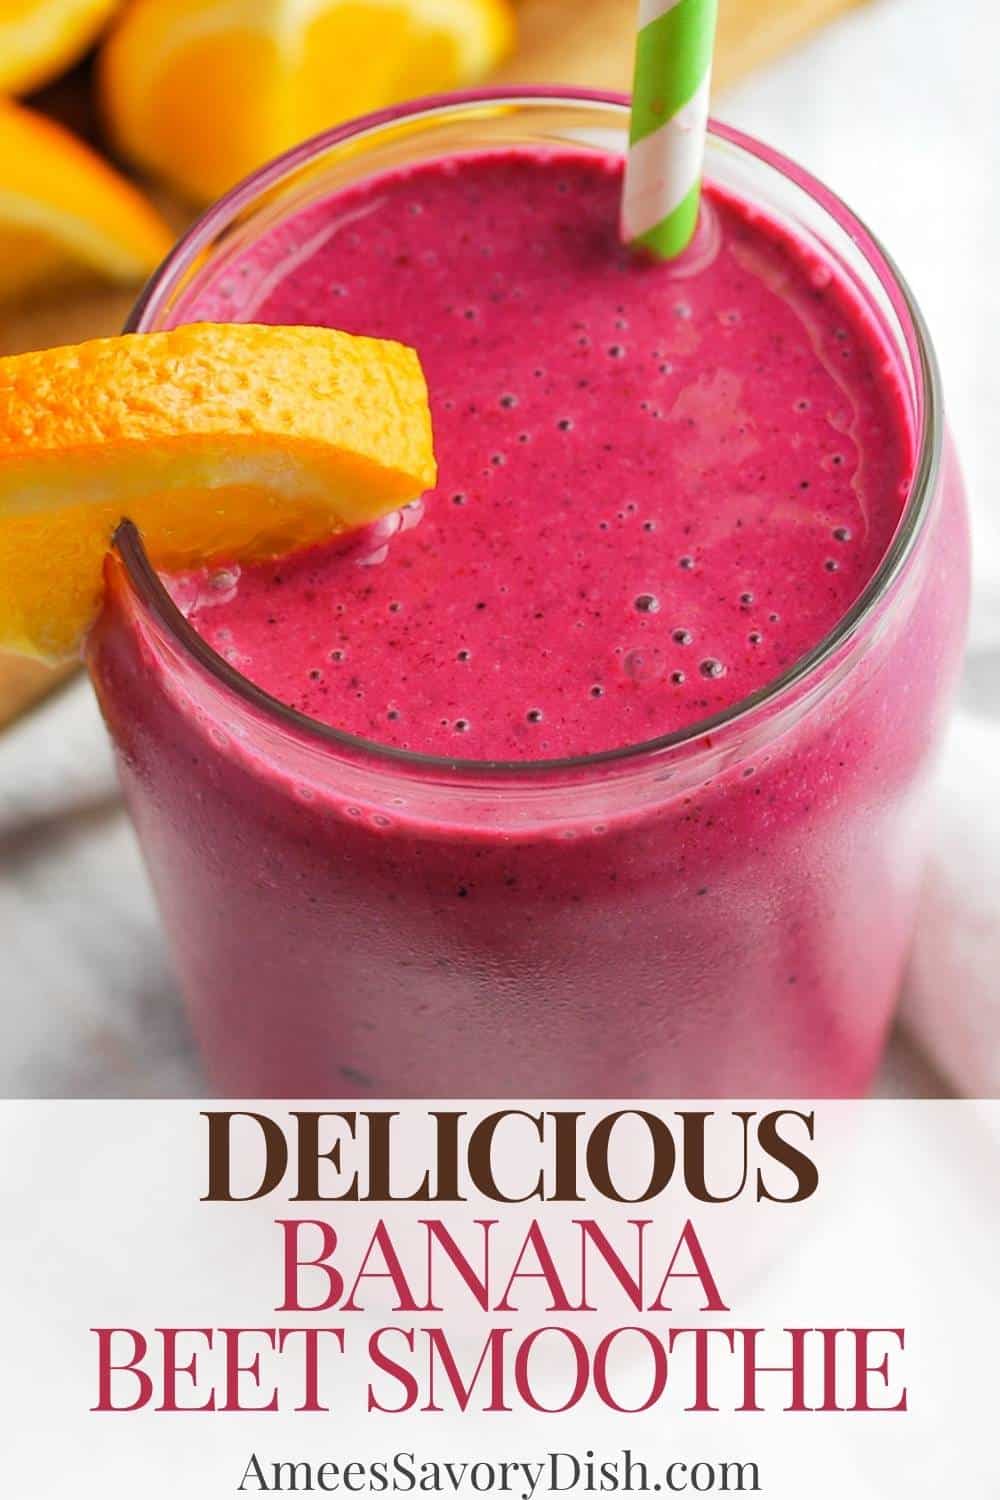 This bright Banana Beet Smoothie is super simple to make with a short list of nutritious and flavorful ingredients. via @Ameessavorydish